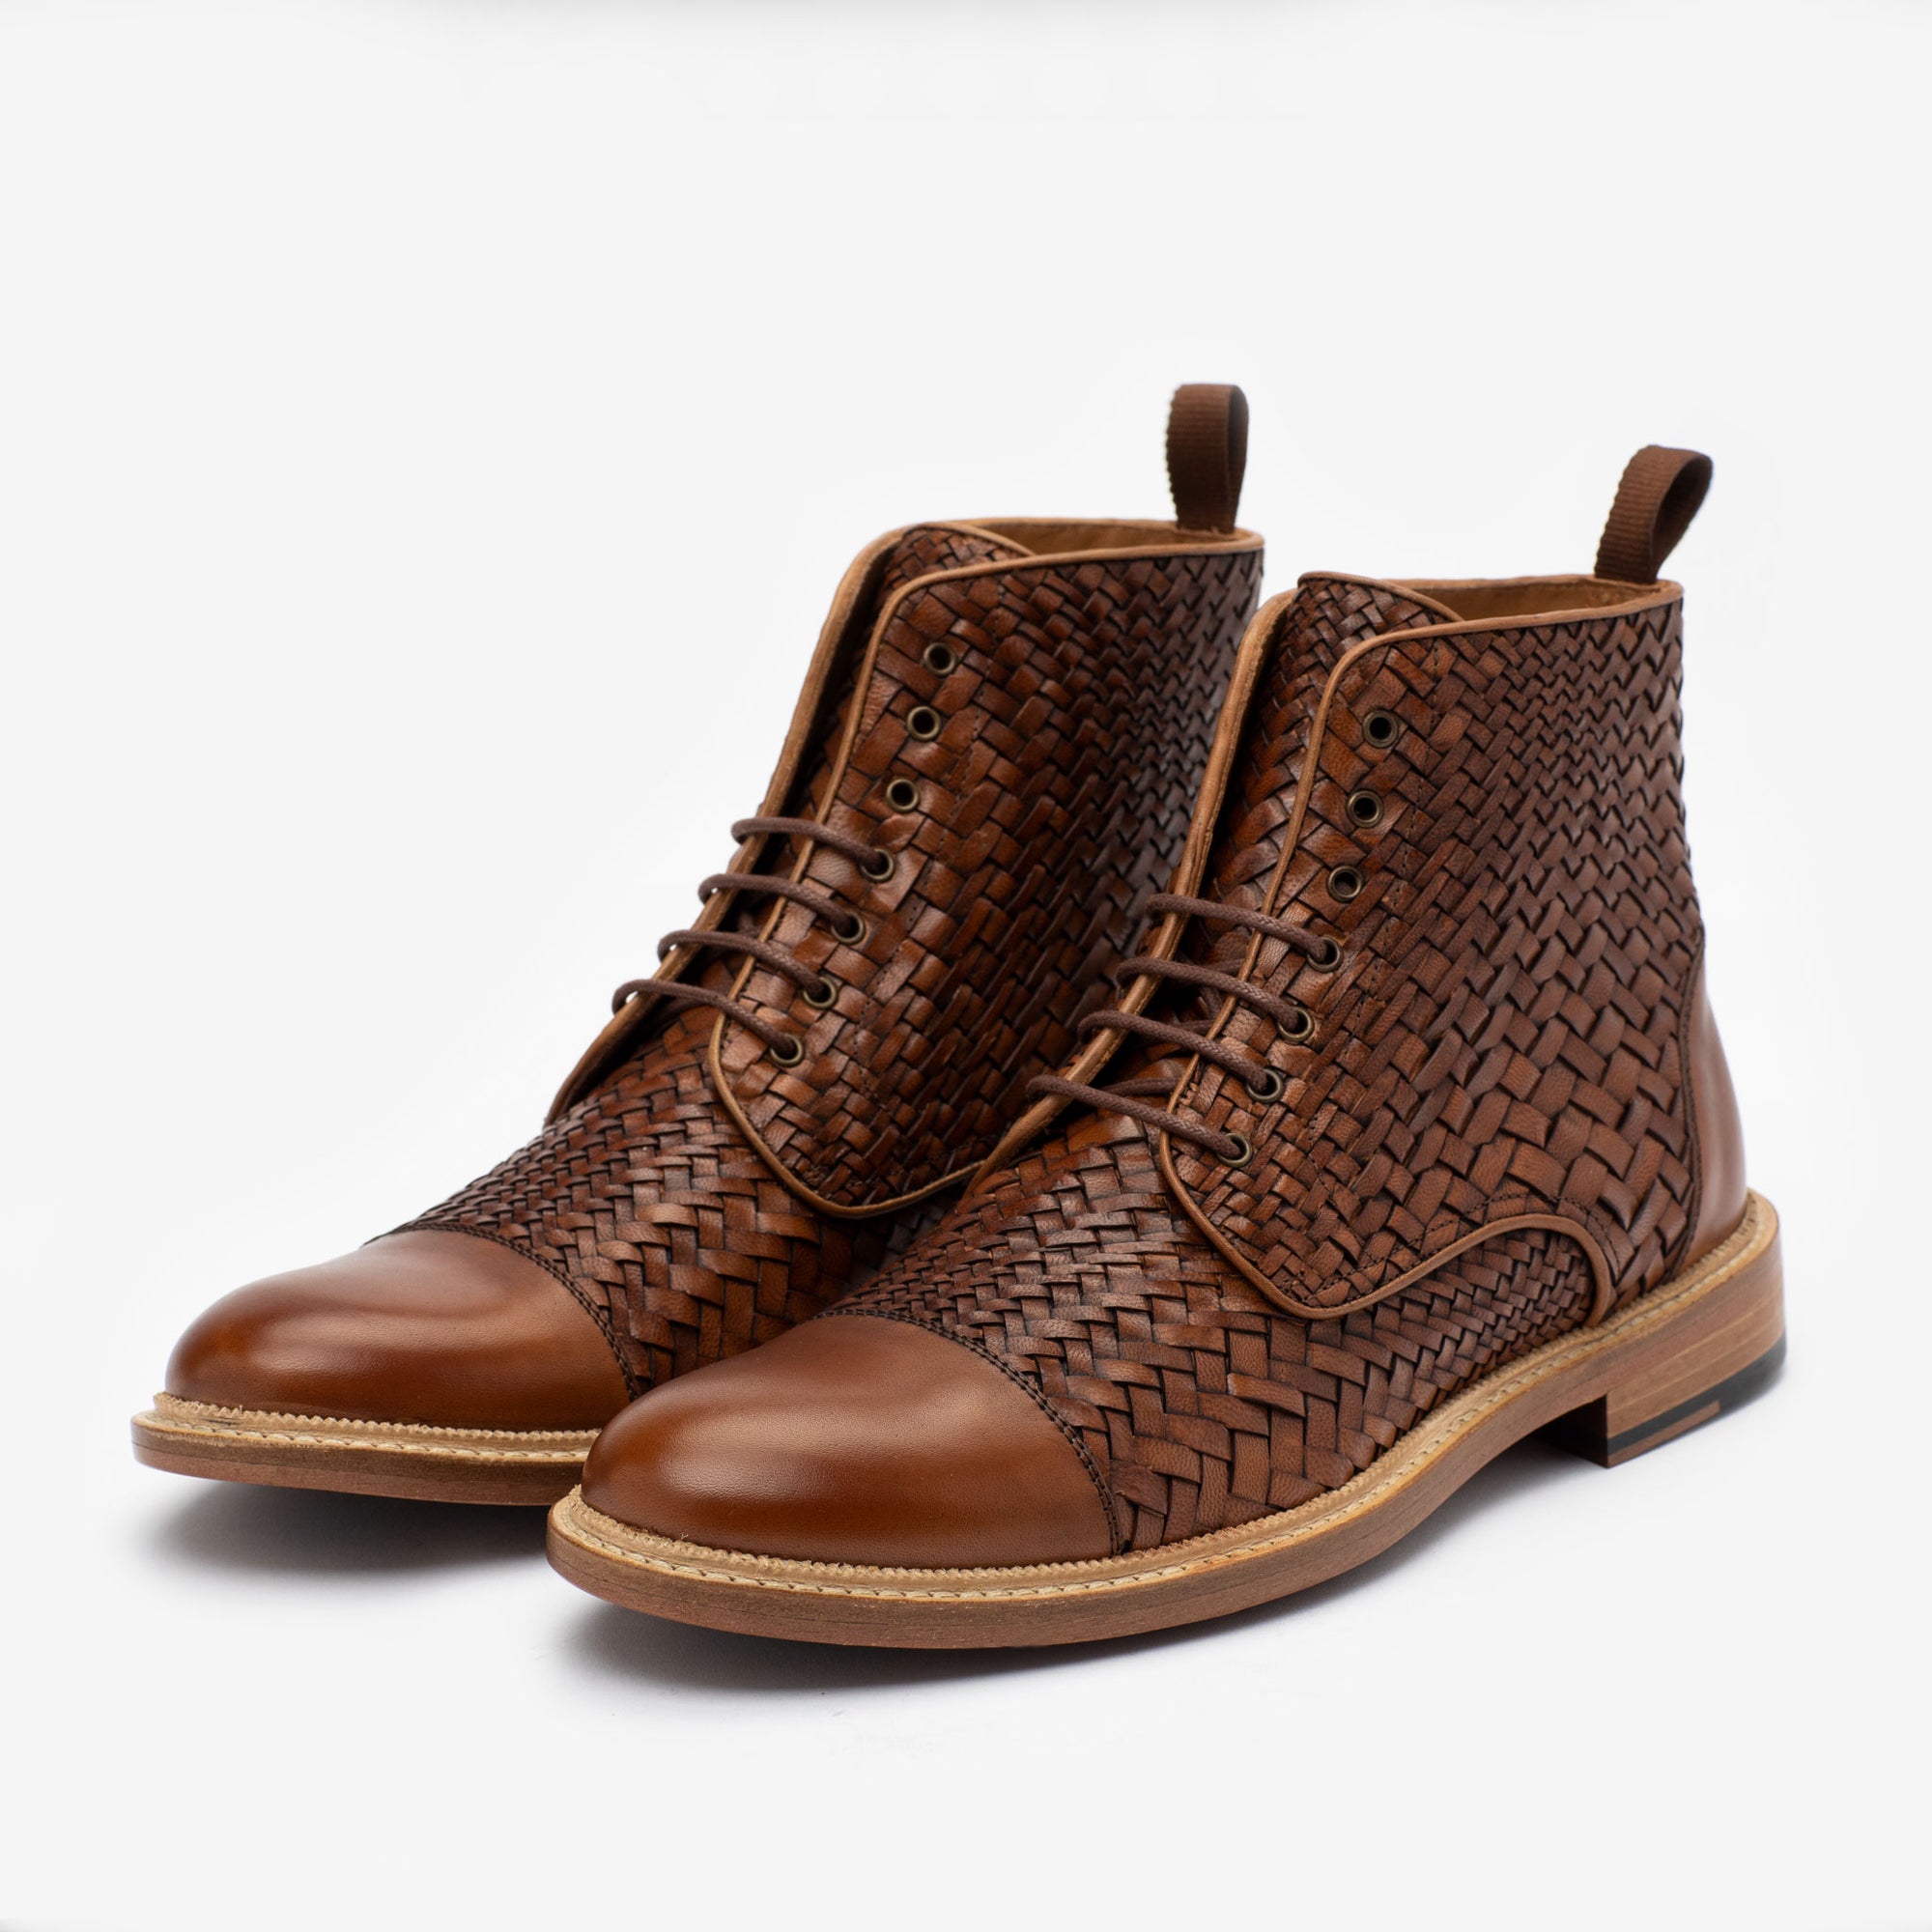 The Rome Boot in Woven {{rollover}}